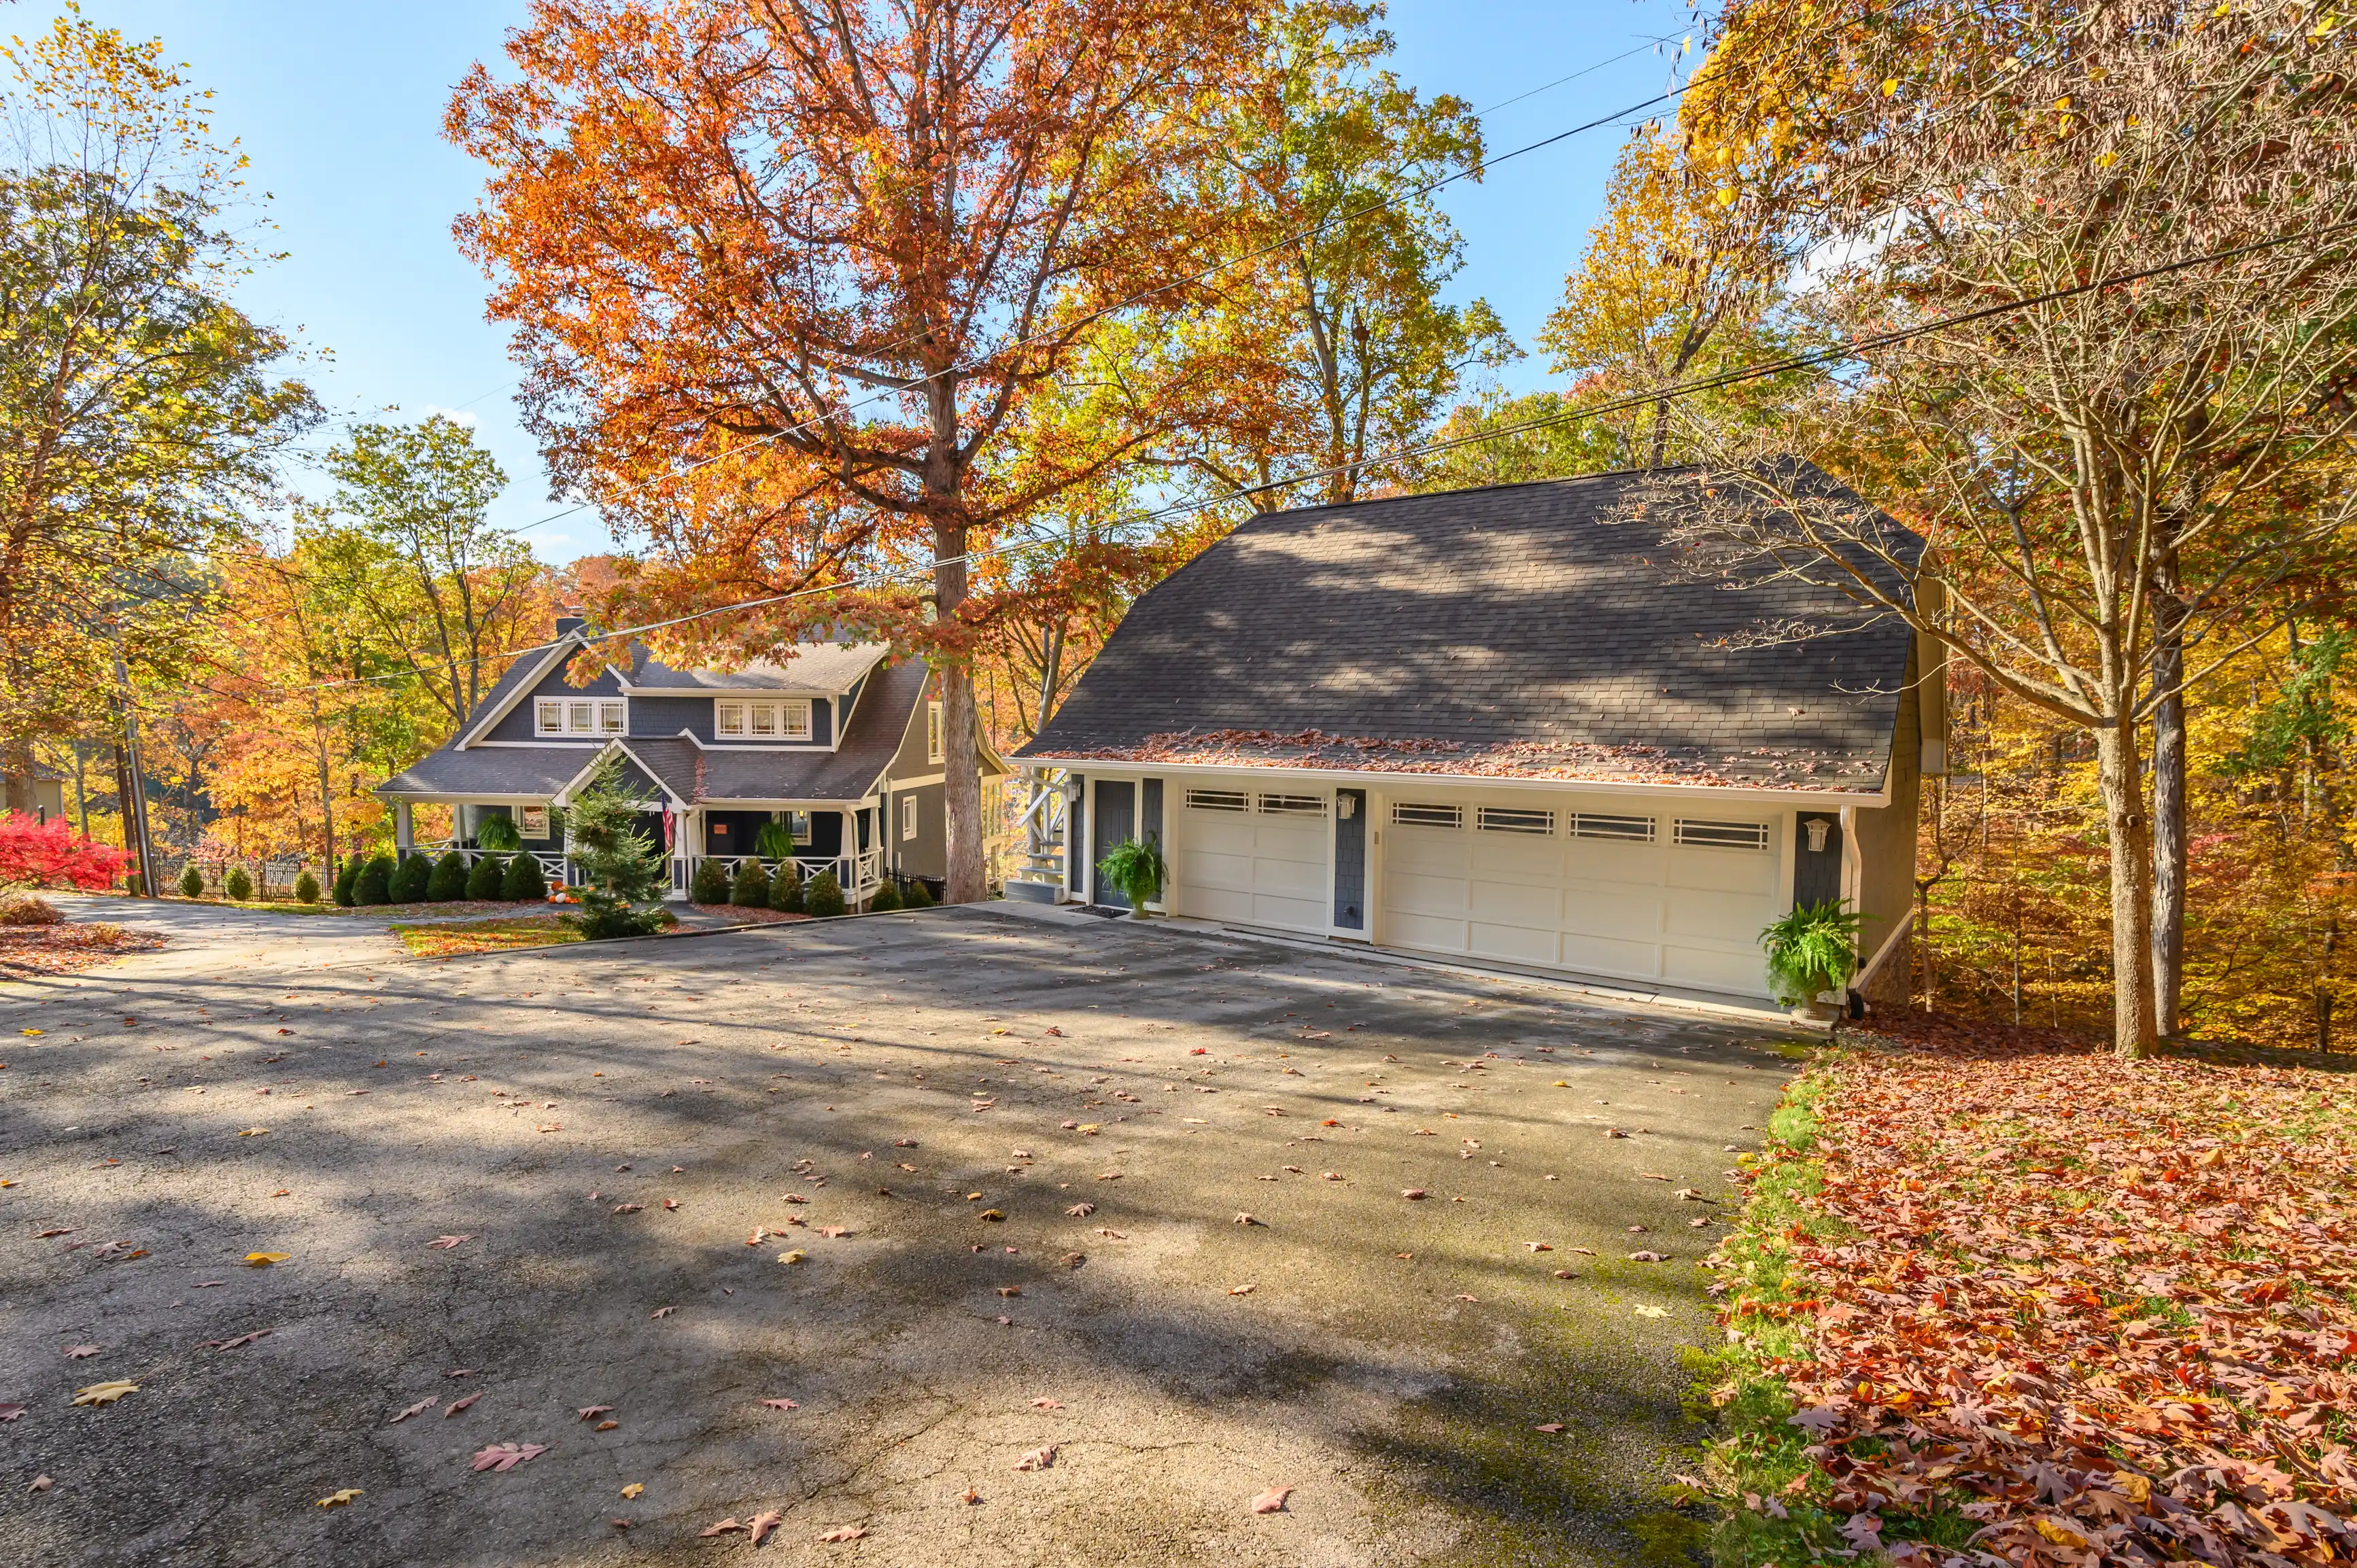 Residential suburban home with a detached three-car garage surrounded by autumn foliage.